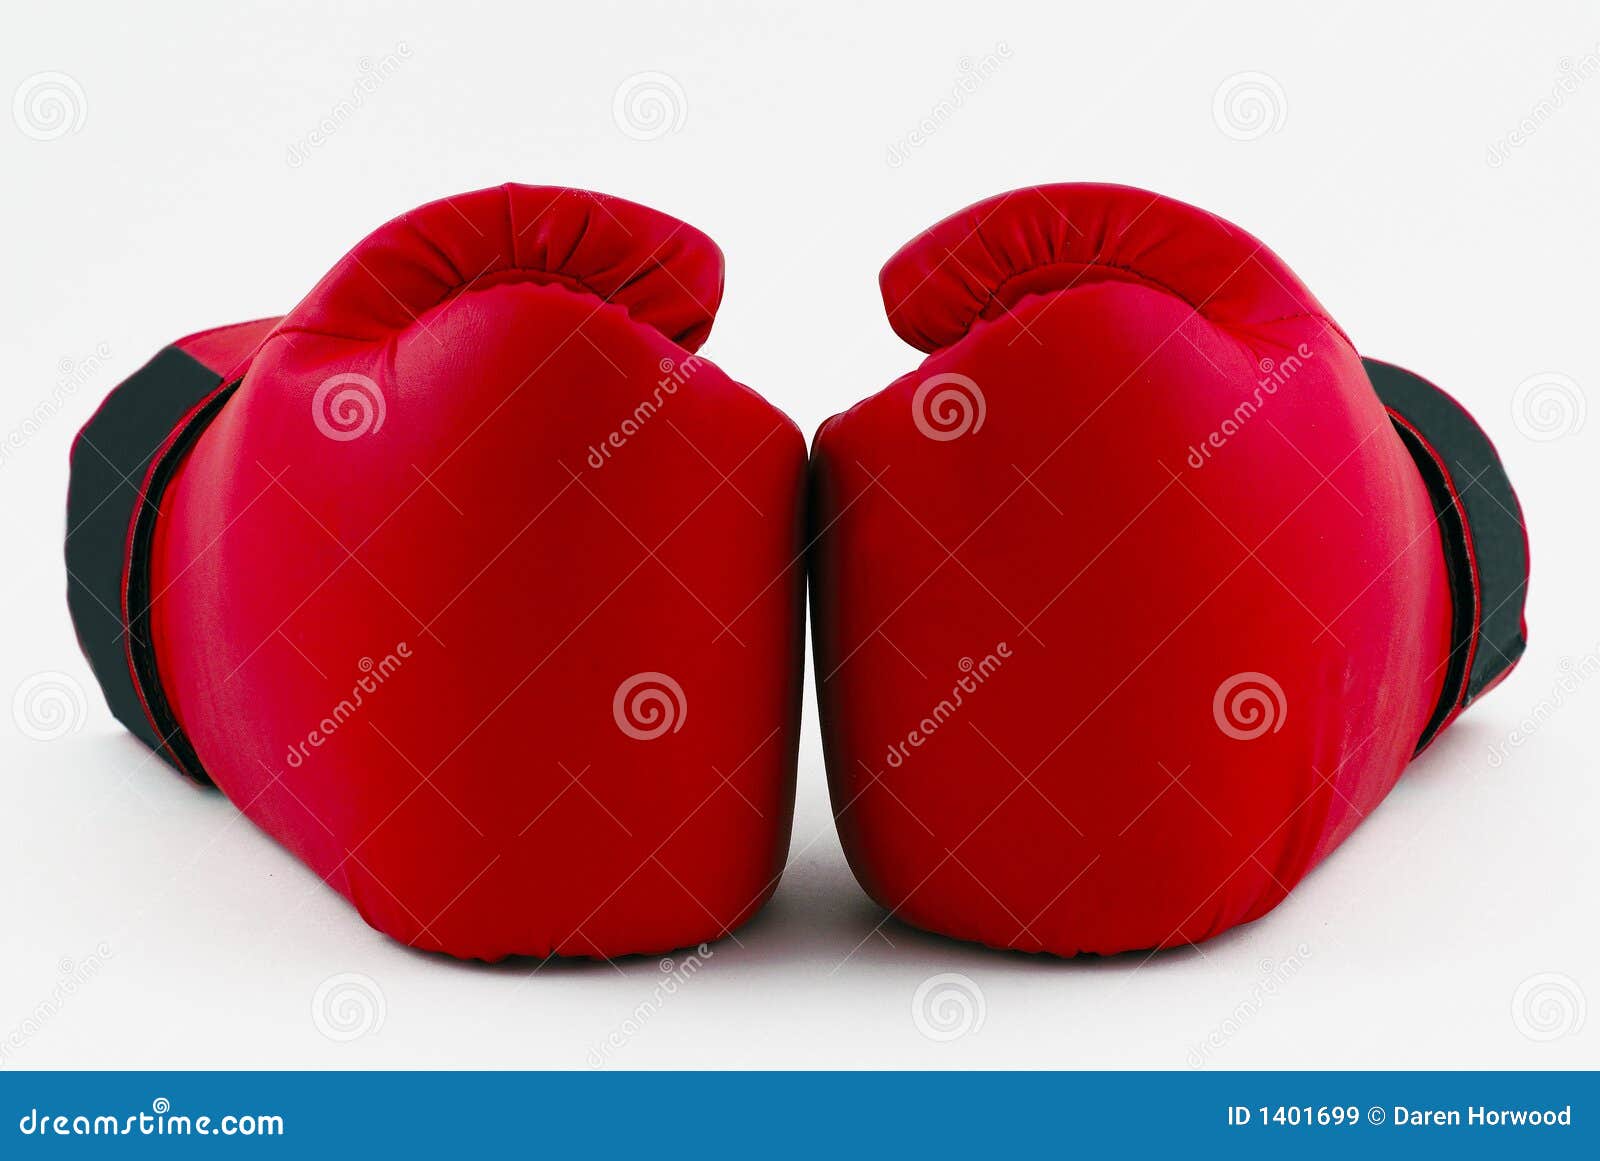 143 Double Punch Stock Photos